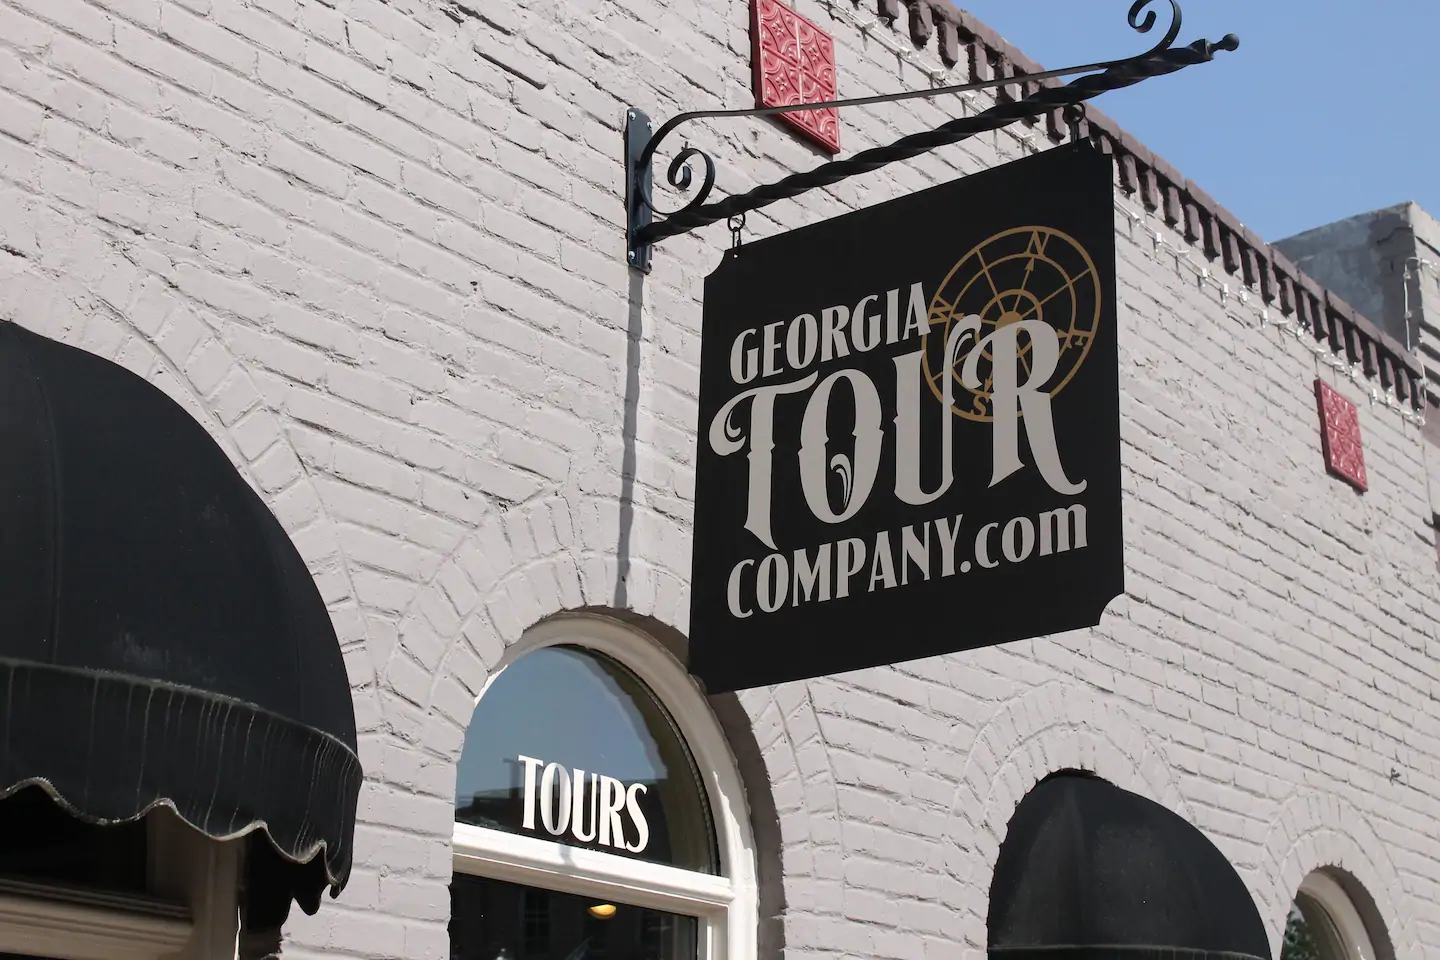 Film tour in Georgia perfect for weekend getaways